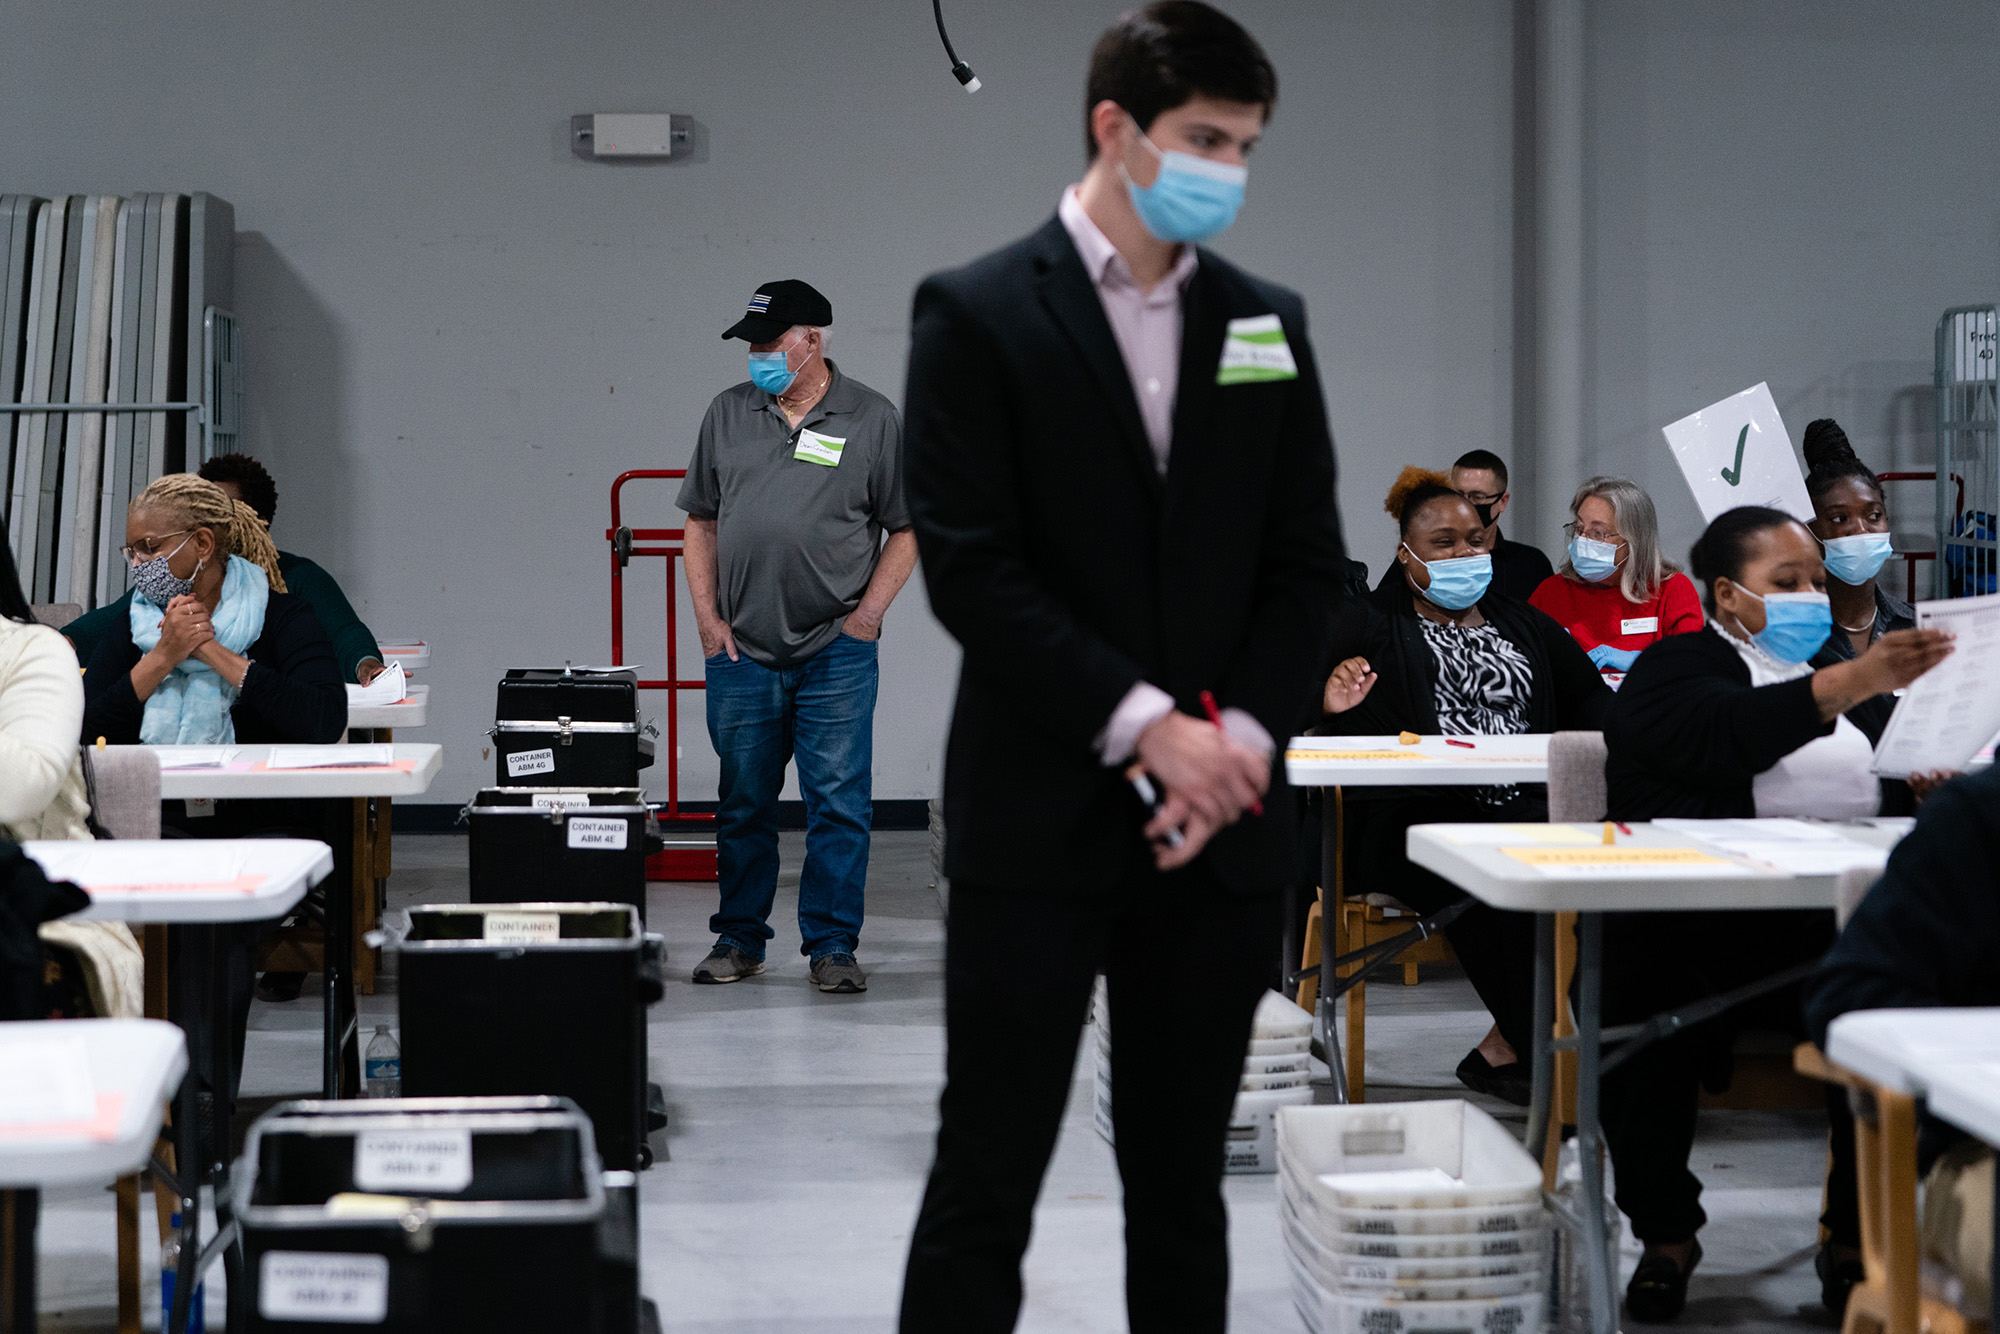 Political party representatives monitor people hand counting 2020 Presidential election ballots during an audit at the Gwinnett County Voter Registration office in Lawrenceville, Georgia, on Friday, November 13, 2020. 